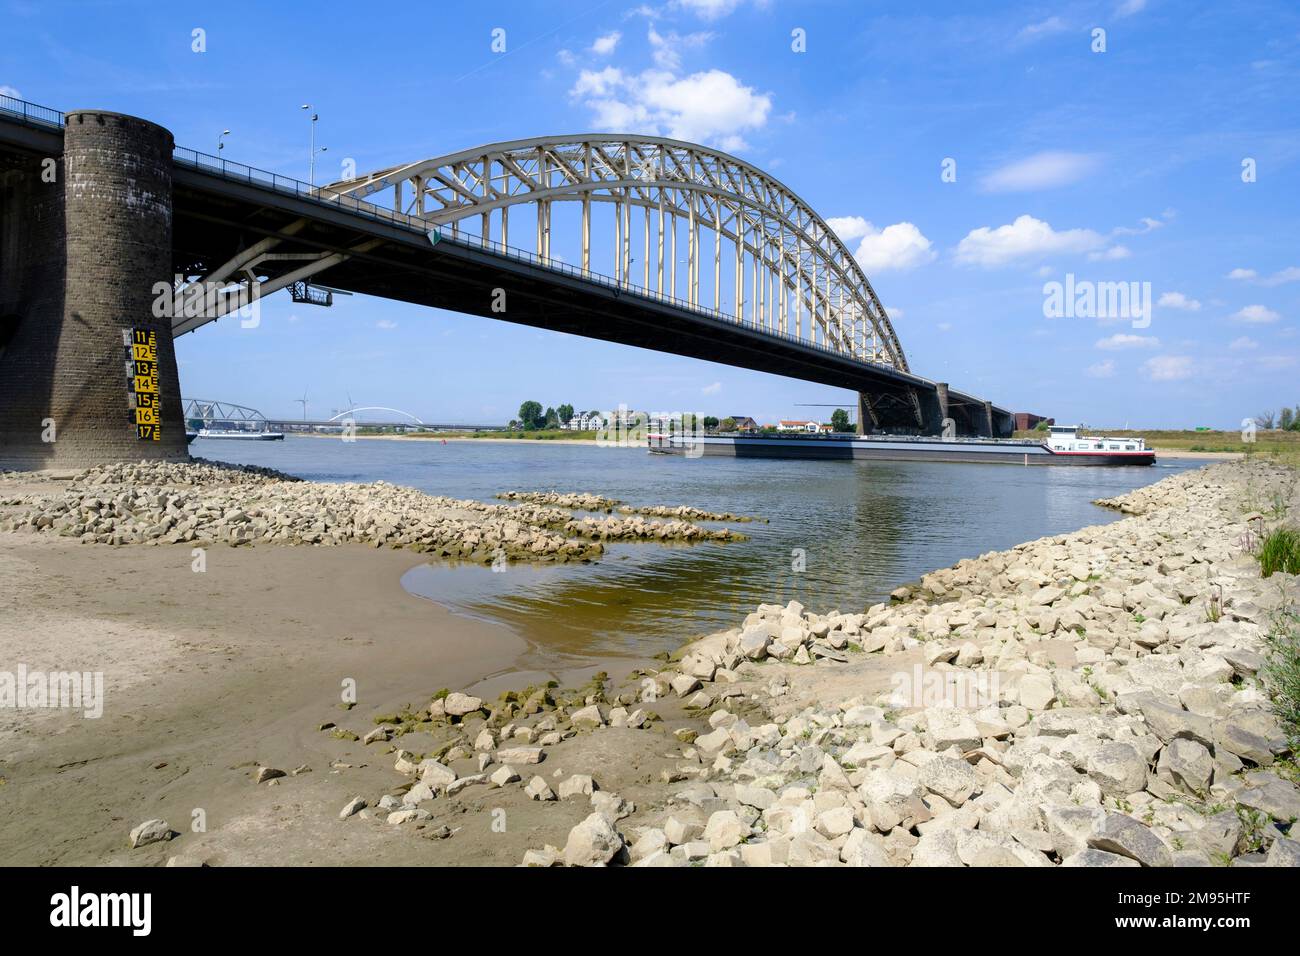 Netherlands, Ooyse Schependom, August 23, 2022: river transport on the River Waal, Rhine delta, during the drought of summer 2022. Chemical tanker on Stock Photo